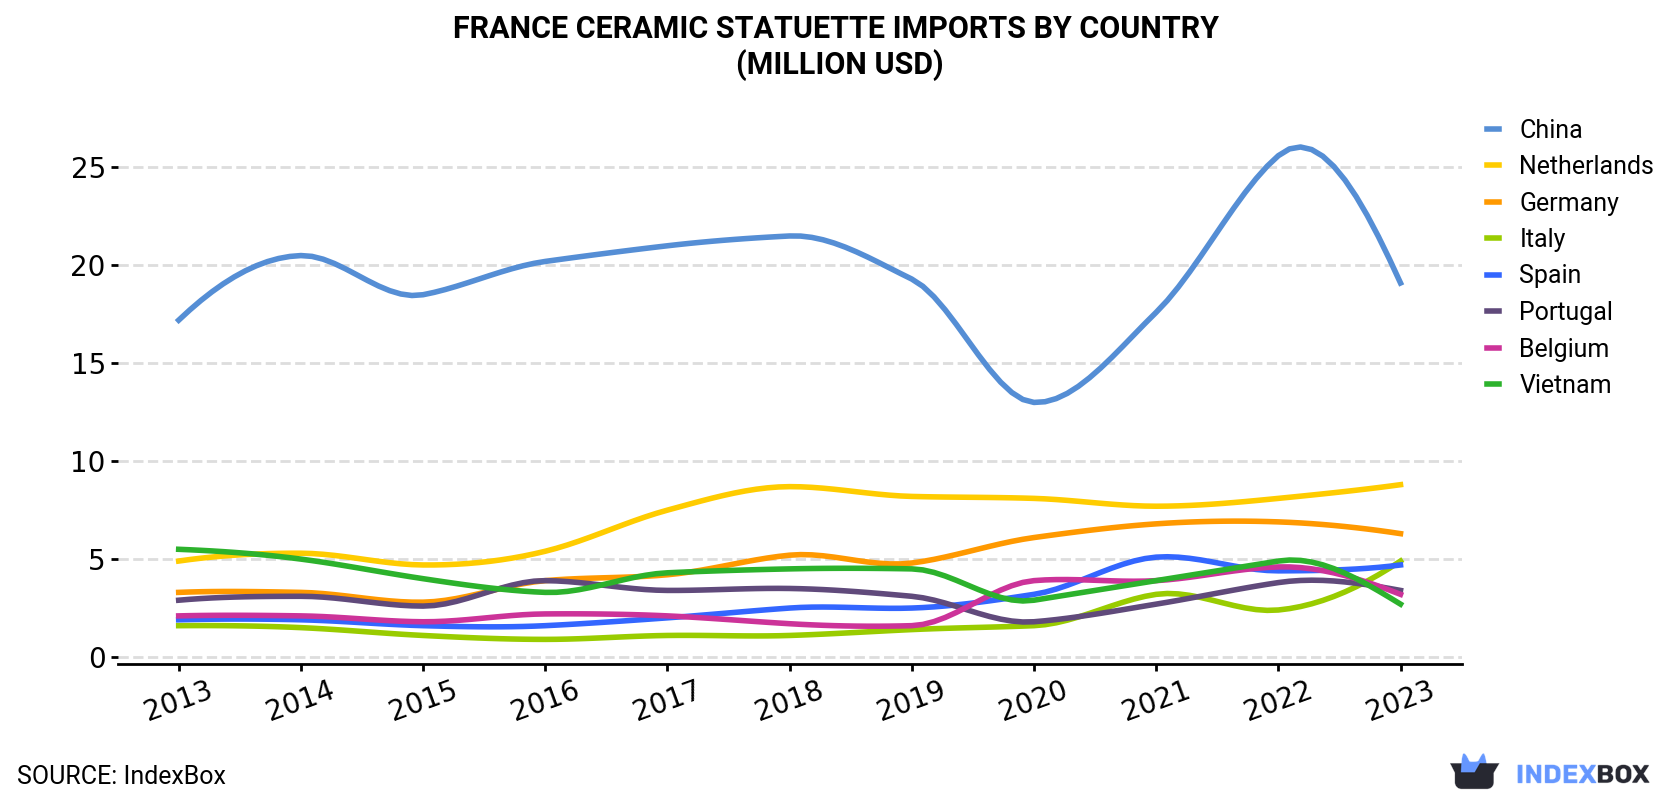 France Ceramic Statuette Imports By Country (Million USD)